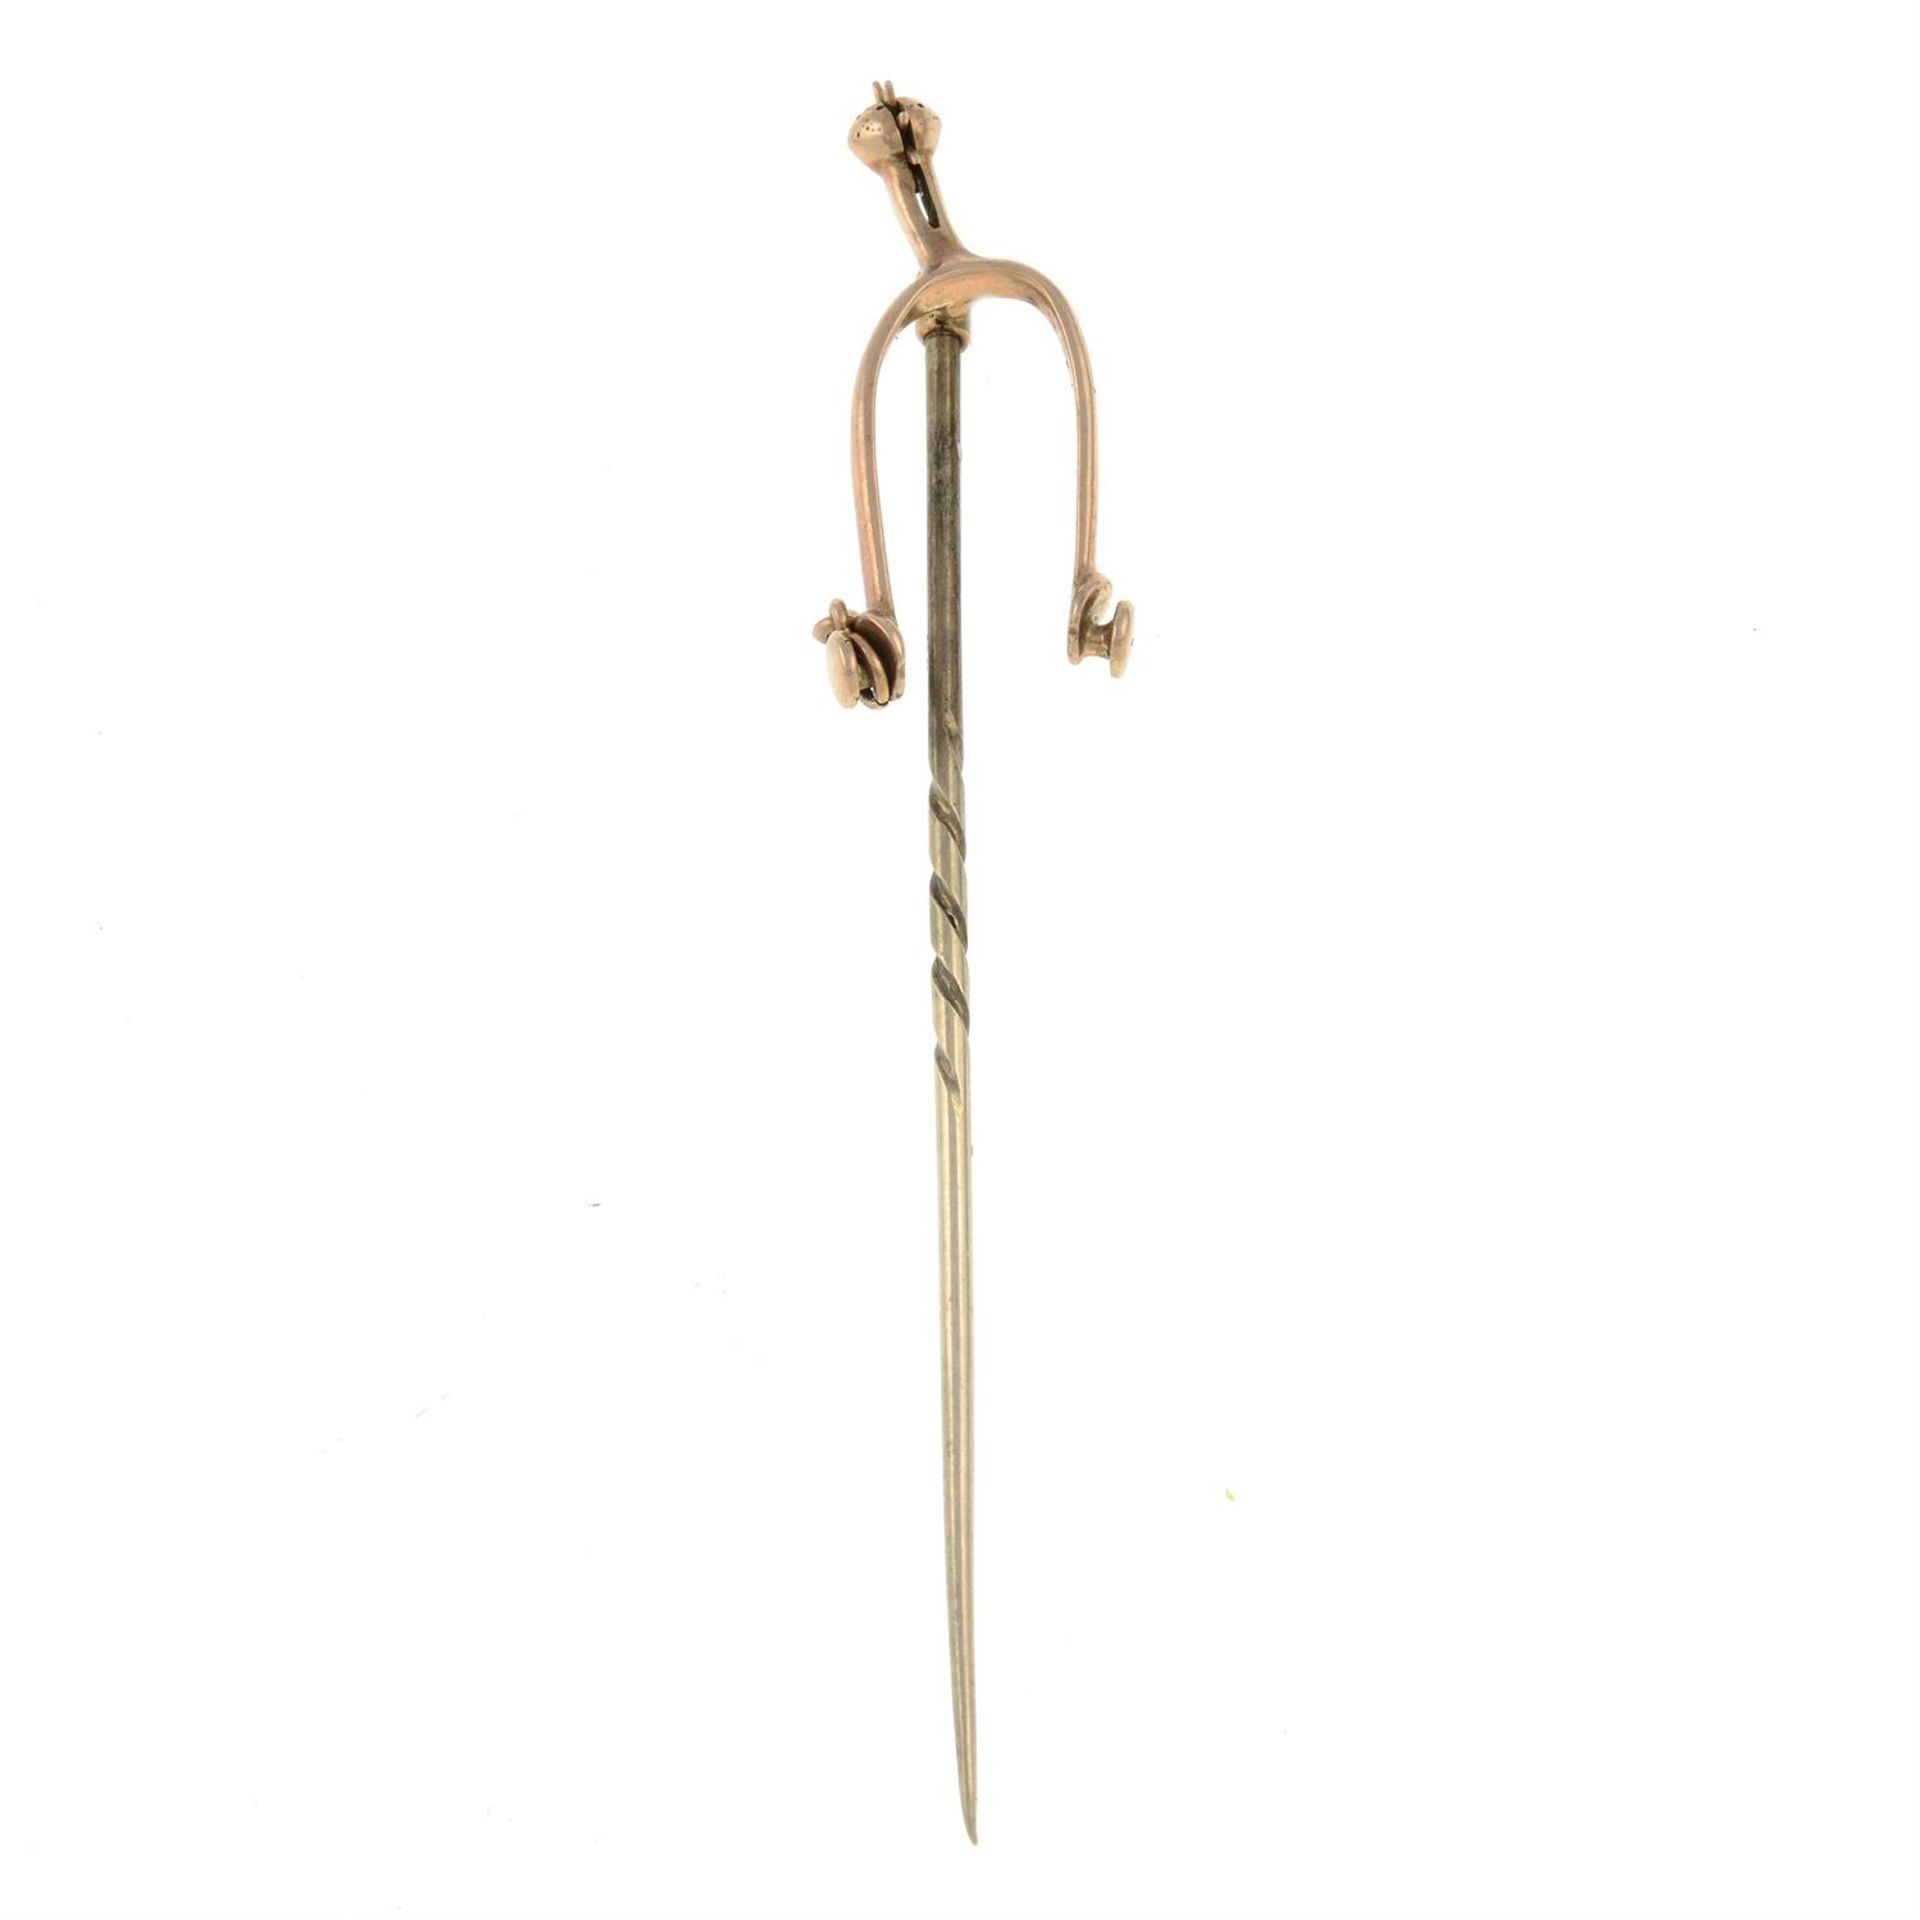 An early 20th century gold riding spur stickpin.